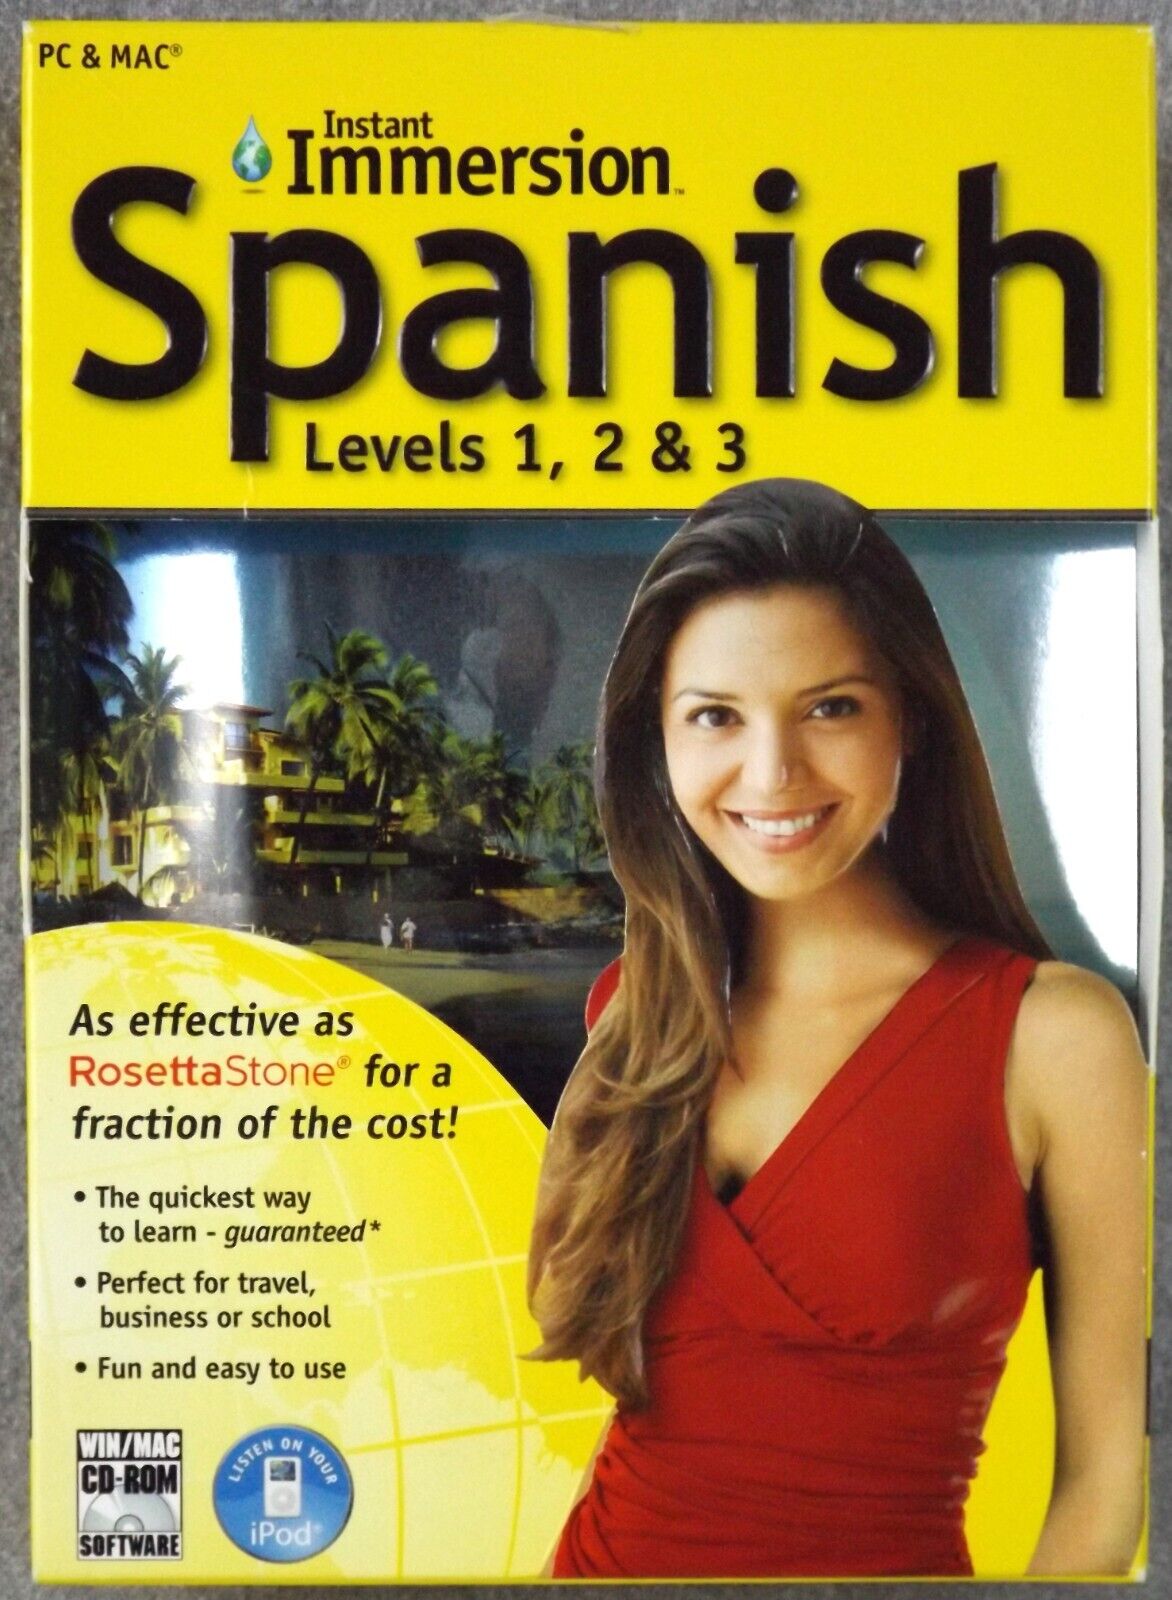 Instant Immersion Spanish Levels 1, 2, 3 (PC and MAC) Compare to Rosetta Stone